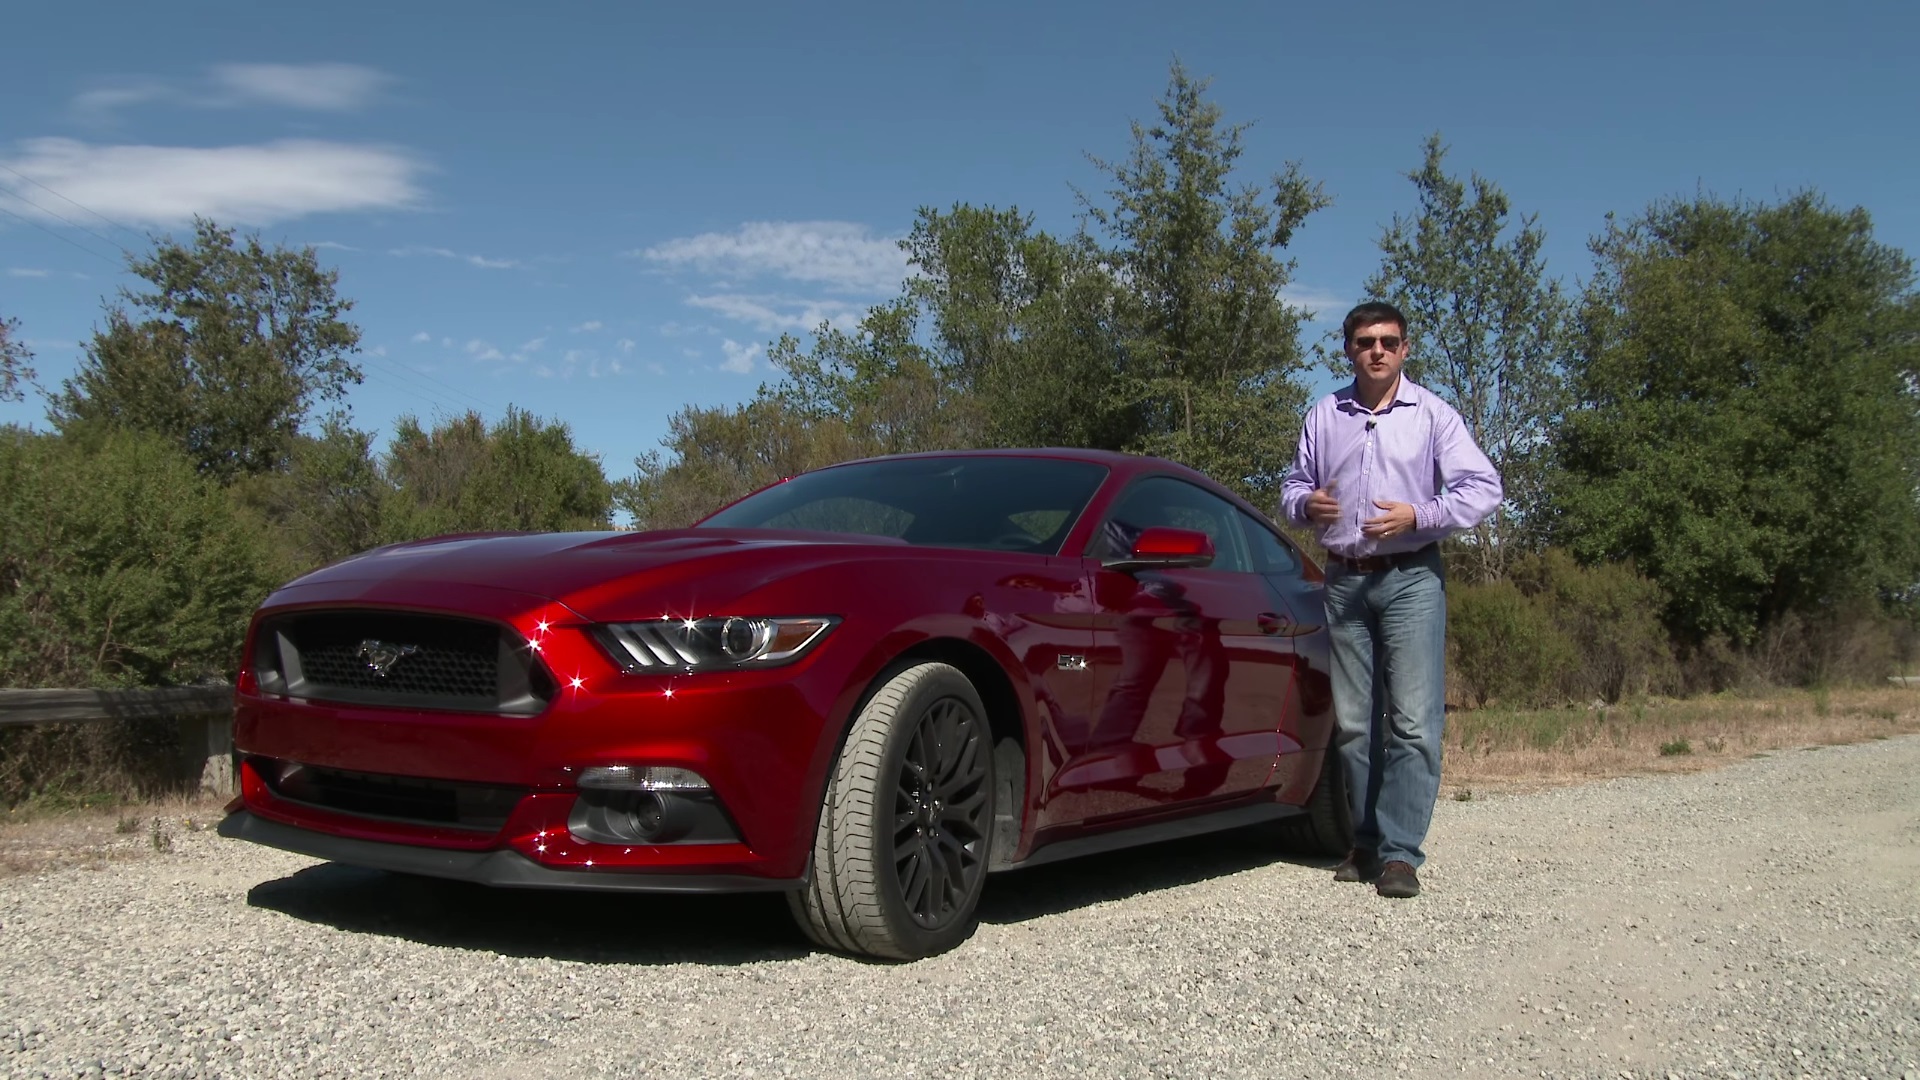 Video: 2015 Mustang GT Coupe Full Review - Detailed in 4K